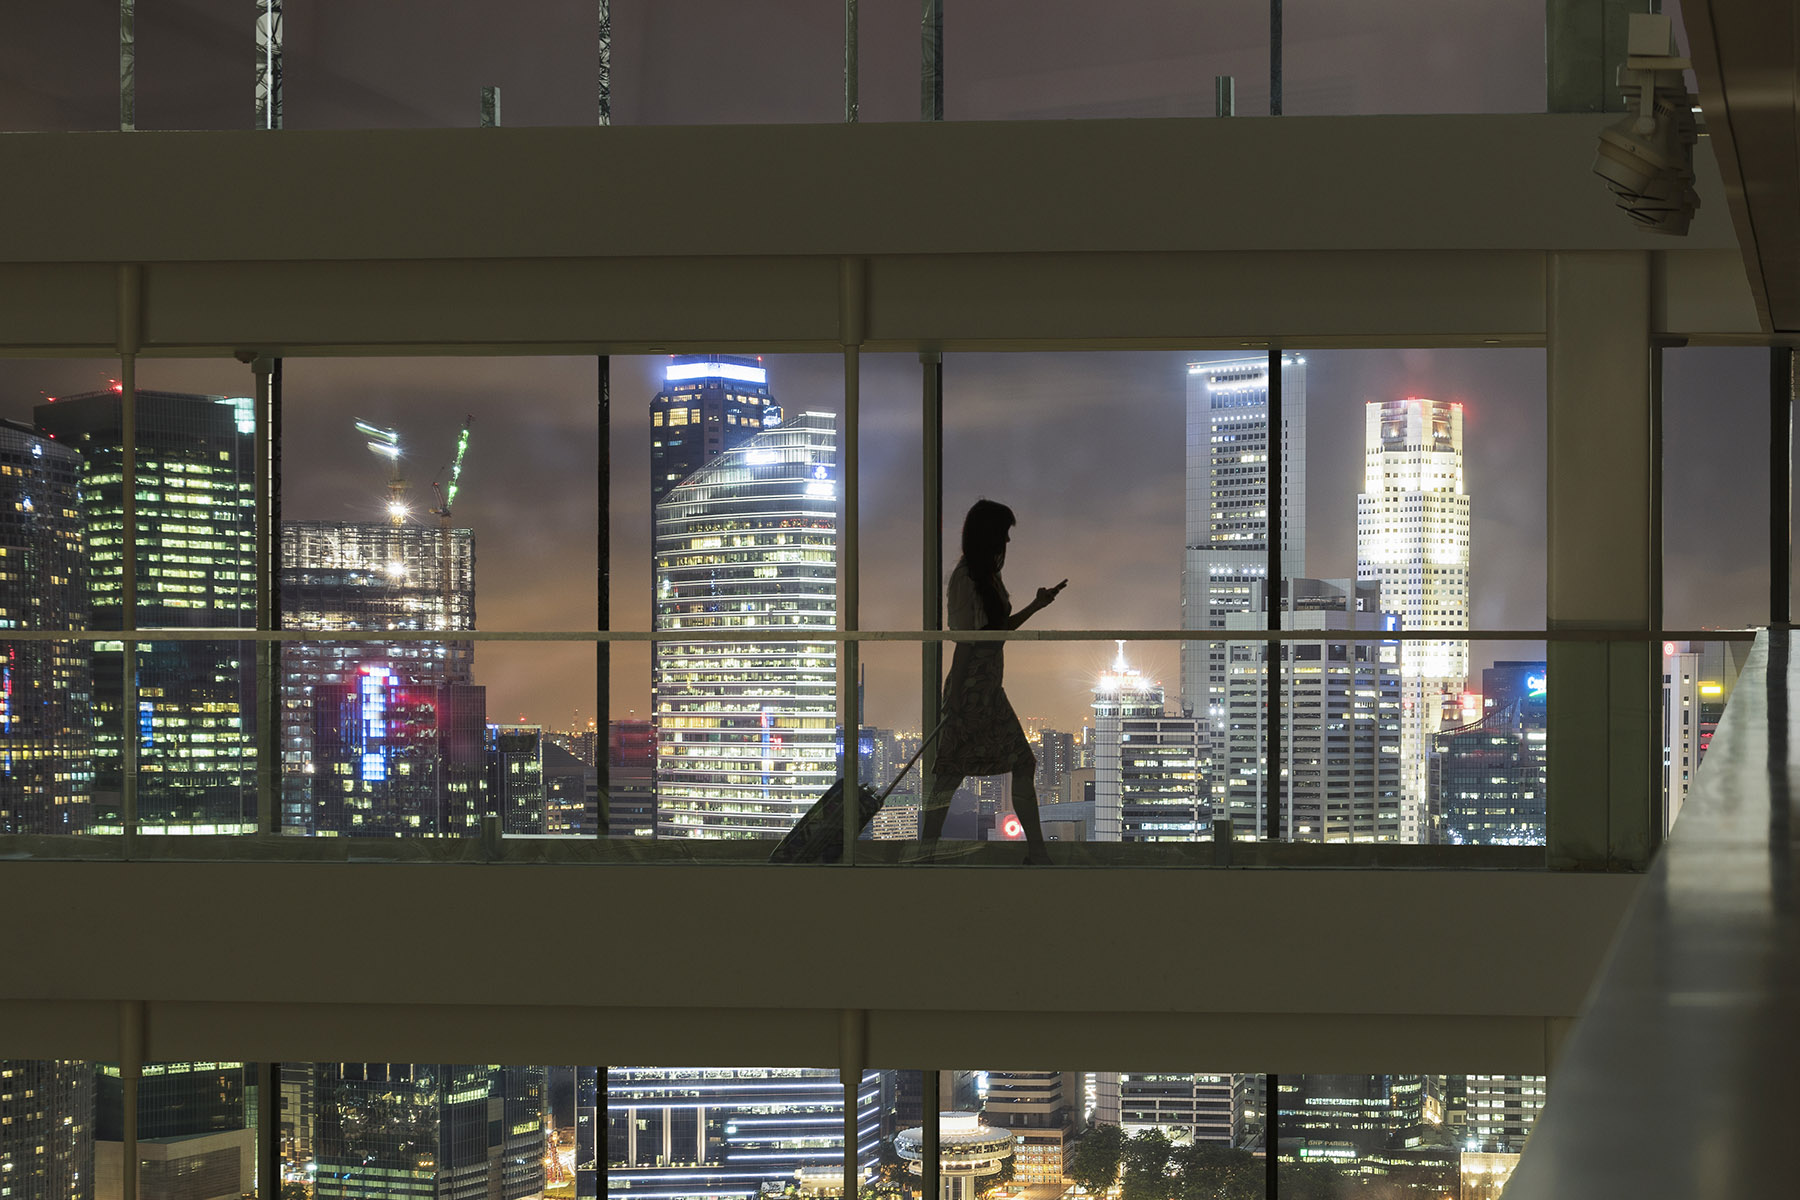 A woman walks alone through a glass paneled sky bridge with a suitcase. She looks at her phone and through the glass the nighttime Singapore skyline is visible